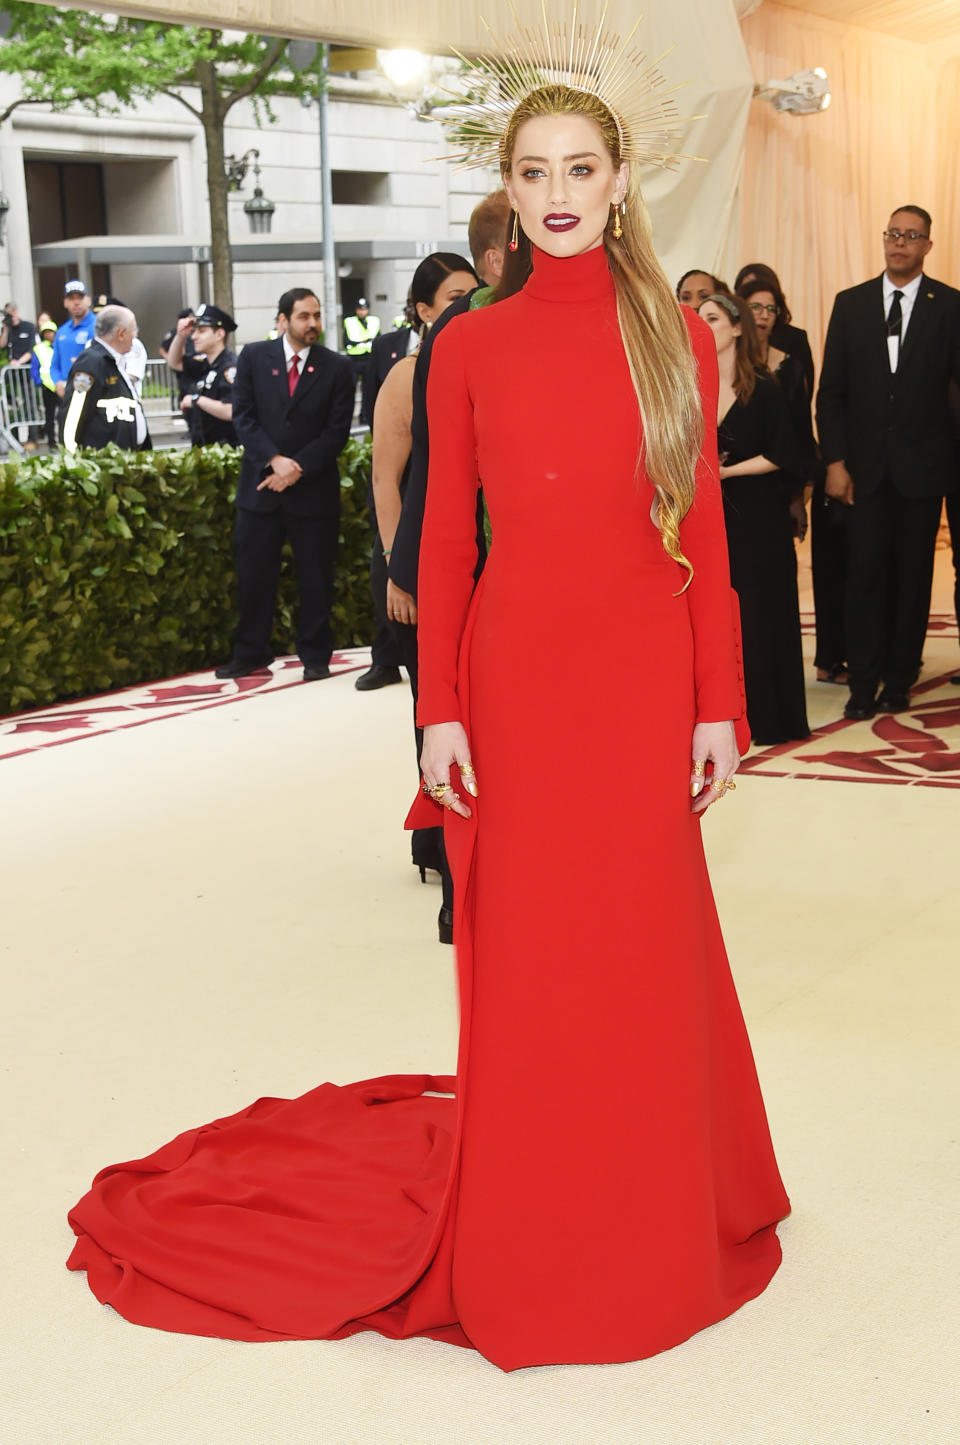 <p>Amber Heard made a dramatic entrance in this ful-length, long-sleeved red gown by Carolina Herrera. Photo: Getty Images </p>